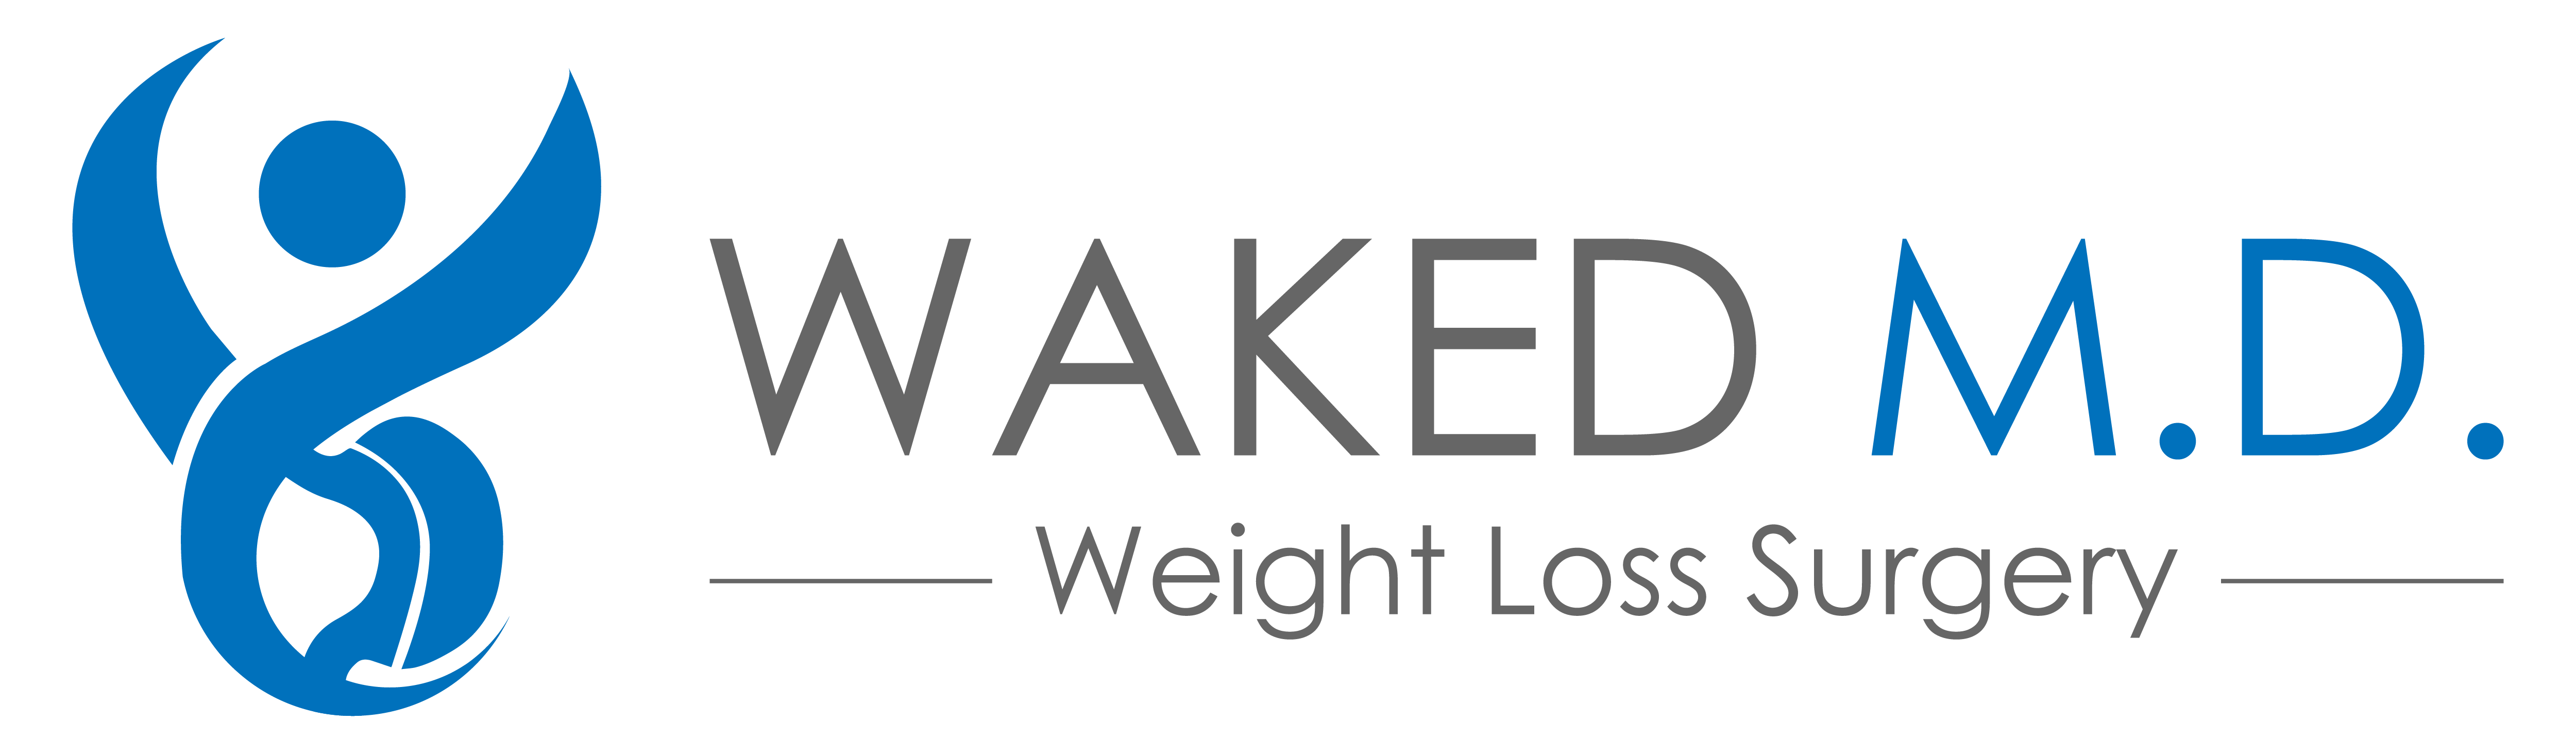 Waked MD | Weight Loss Surgery Delaware